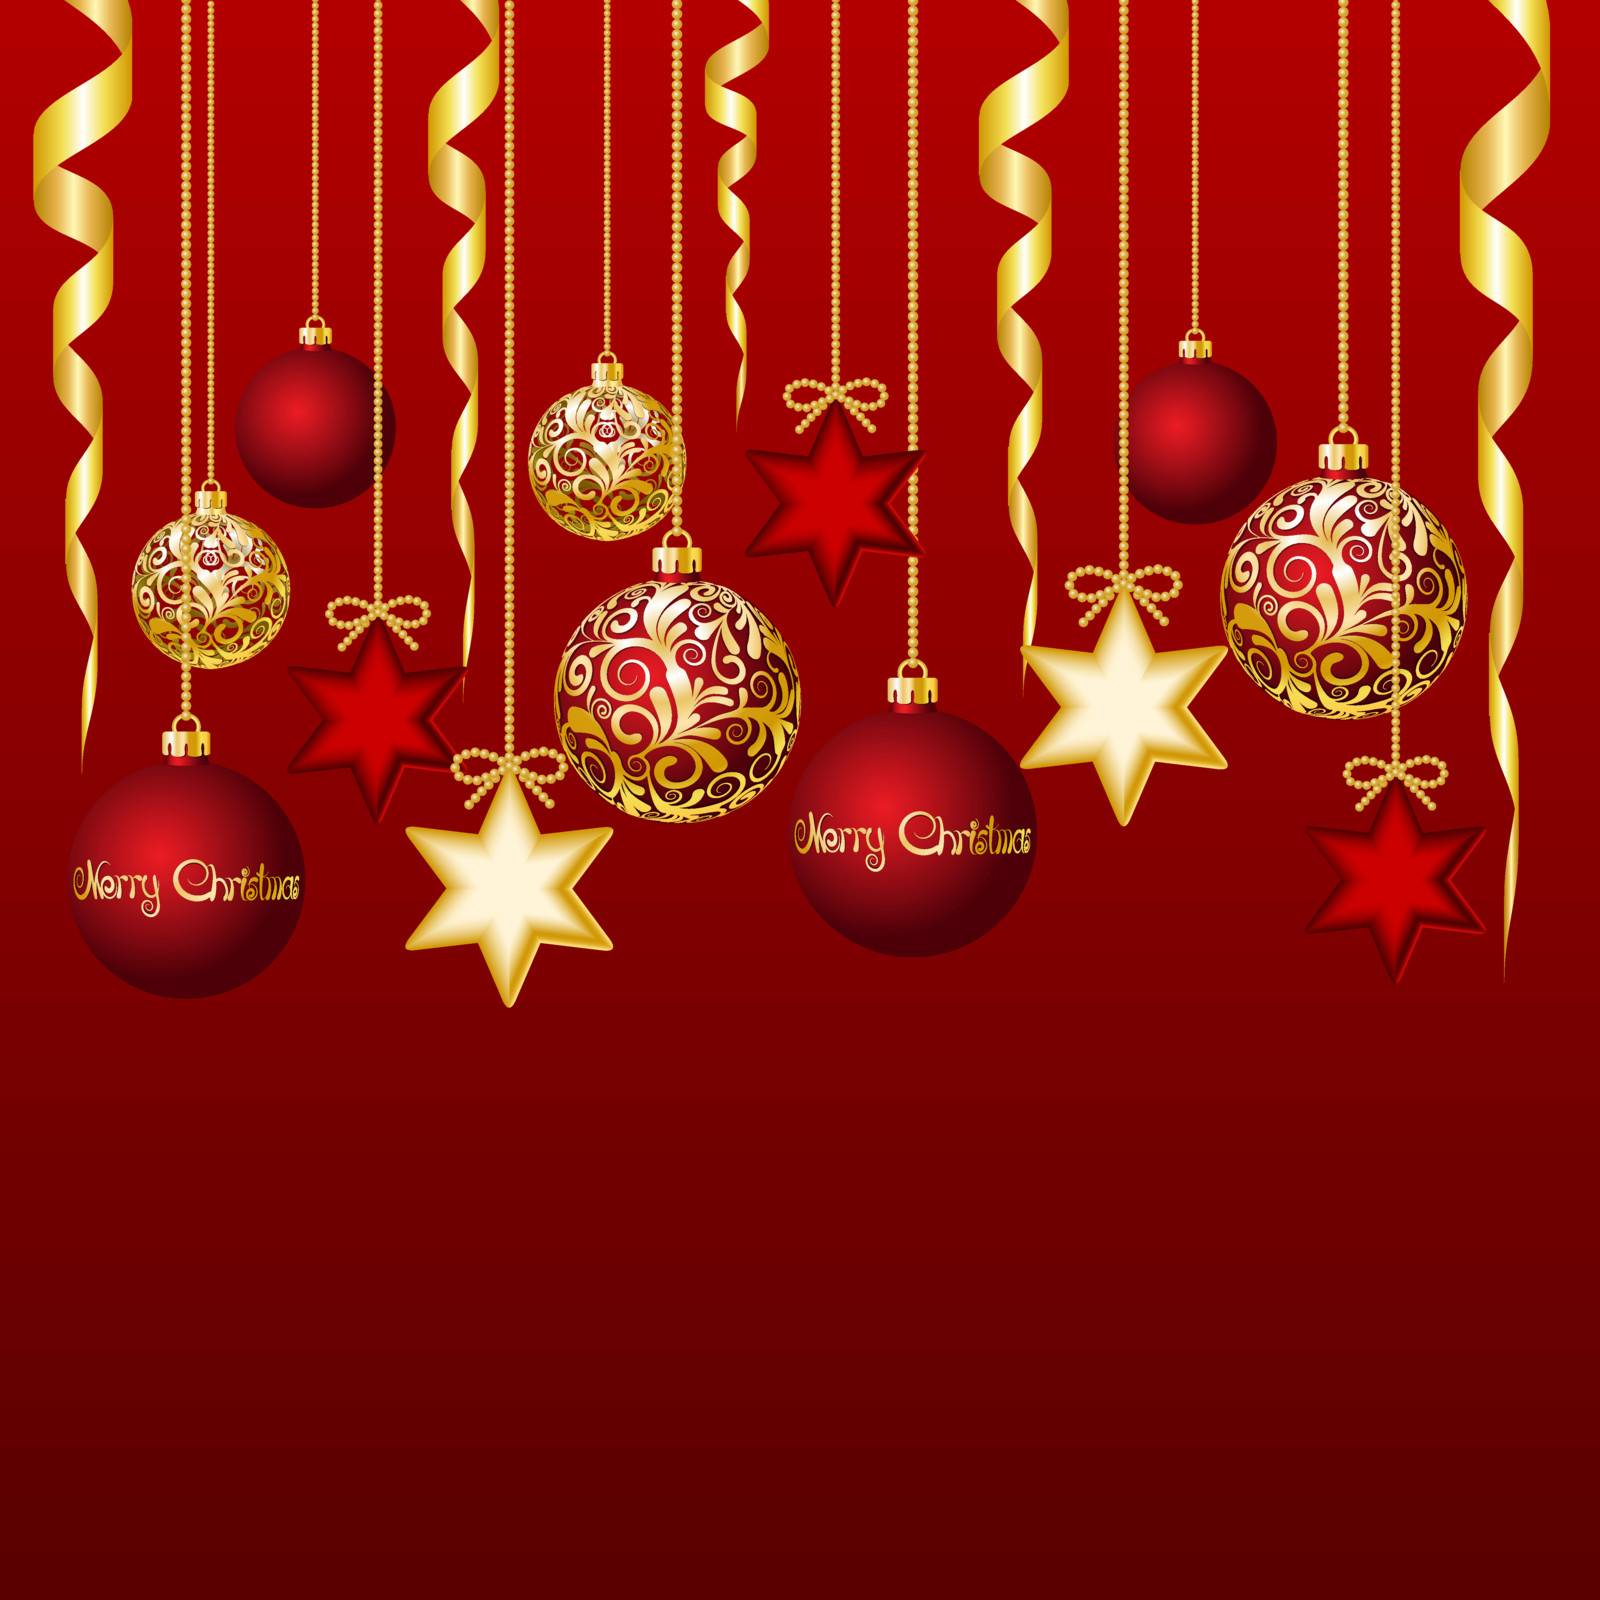 Red card with christmas balls, vector illustration